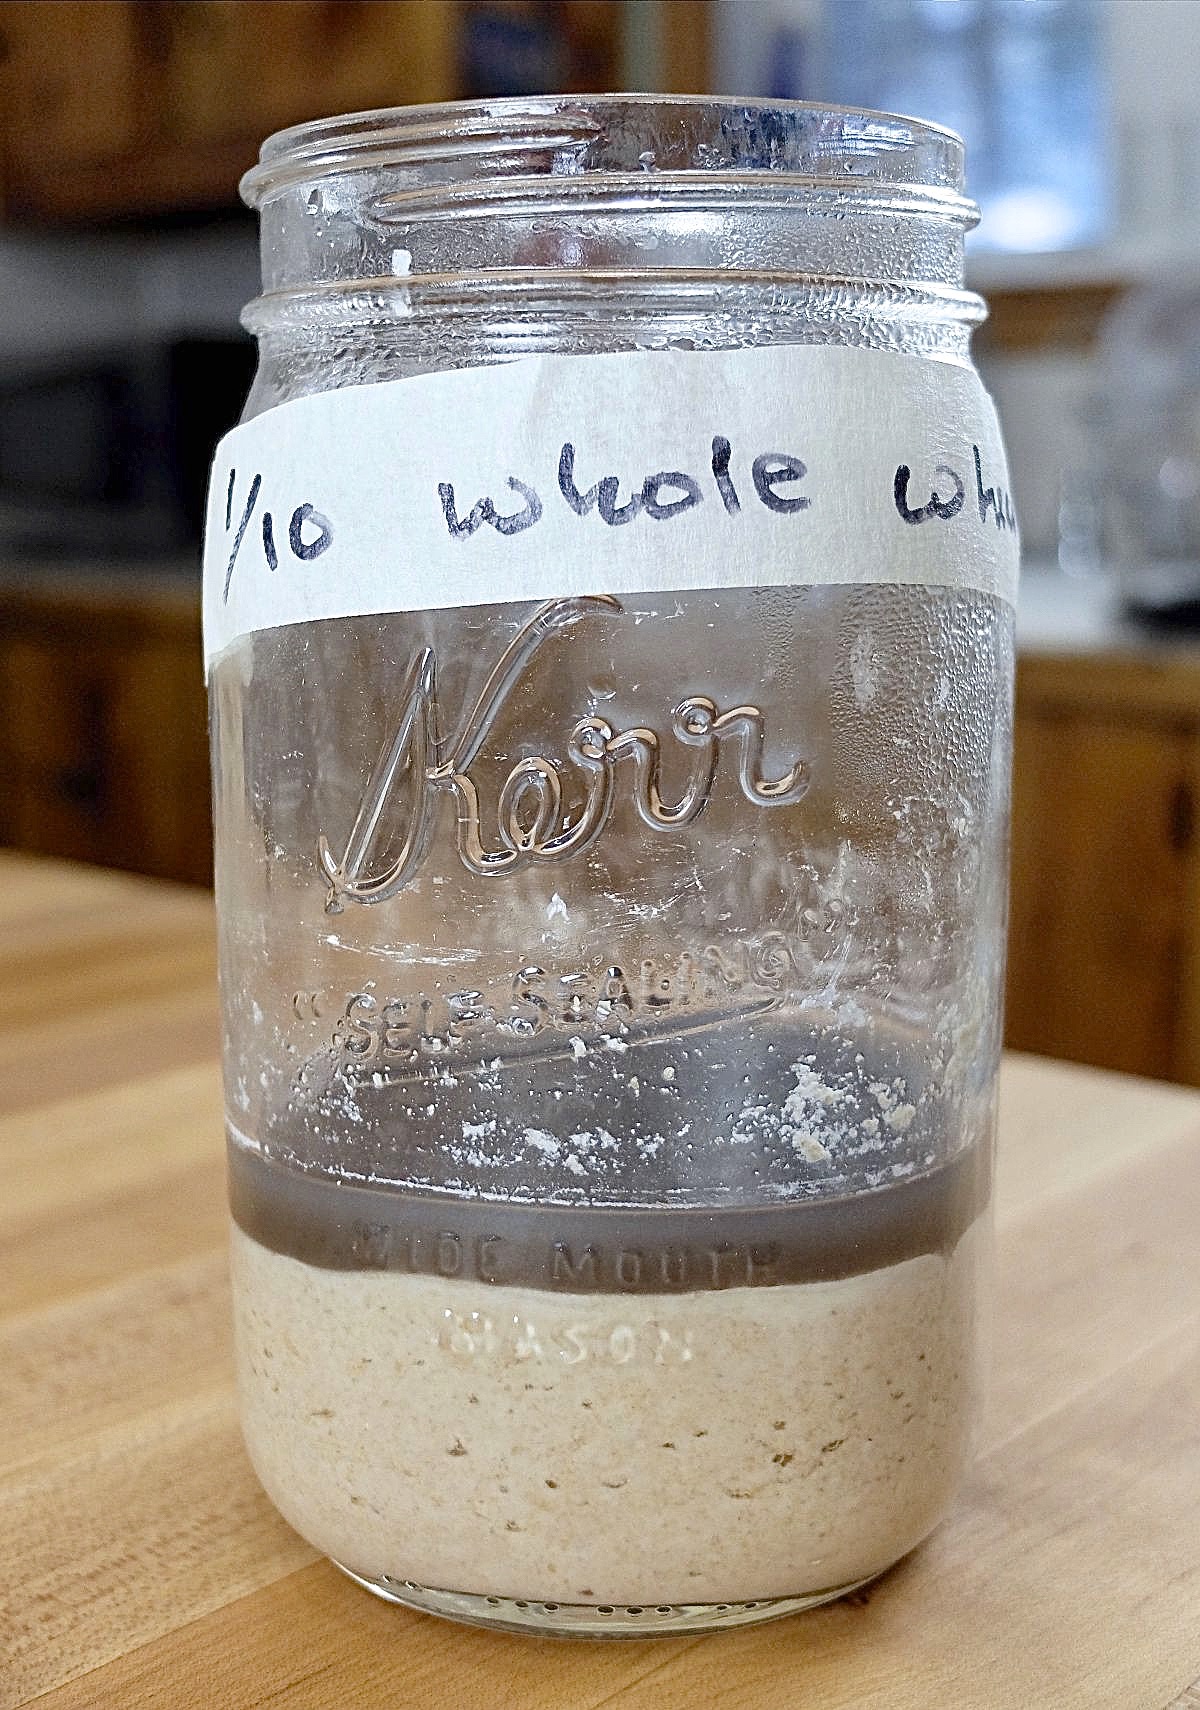 How Do I Know If My Sourdough Starter is Bad 